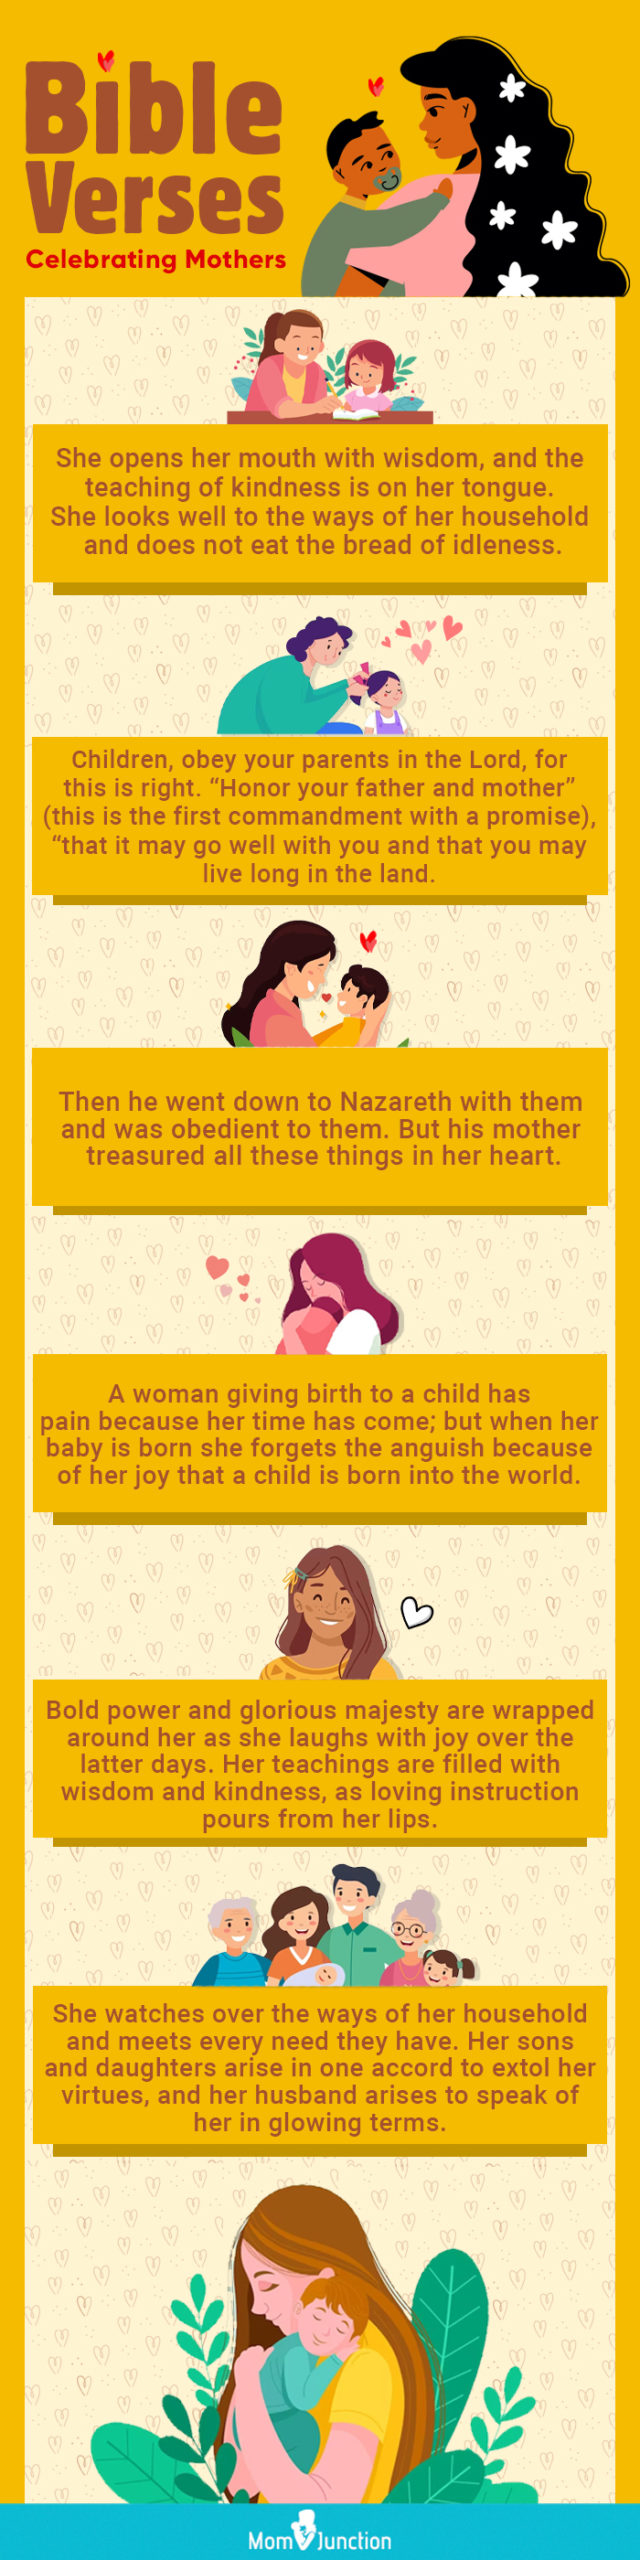 bible verses celebrating mothers(infographic)